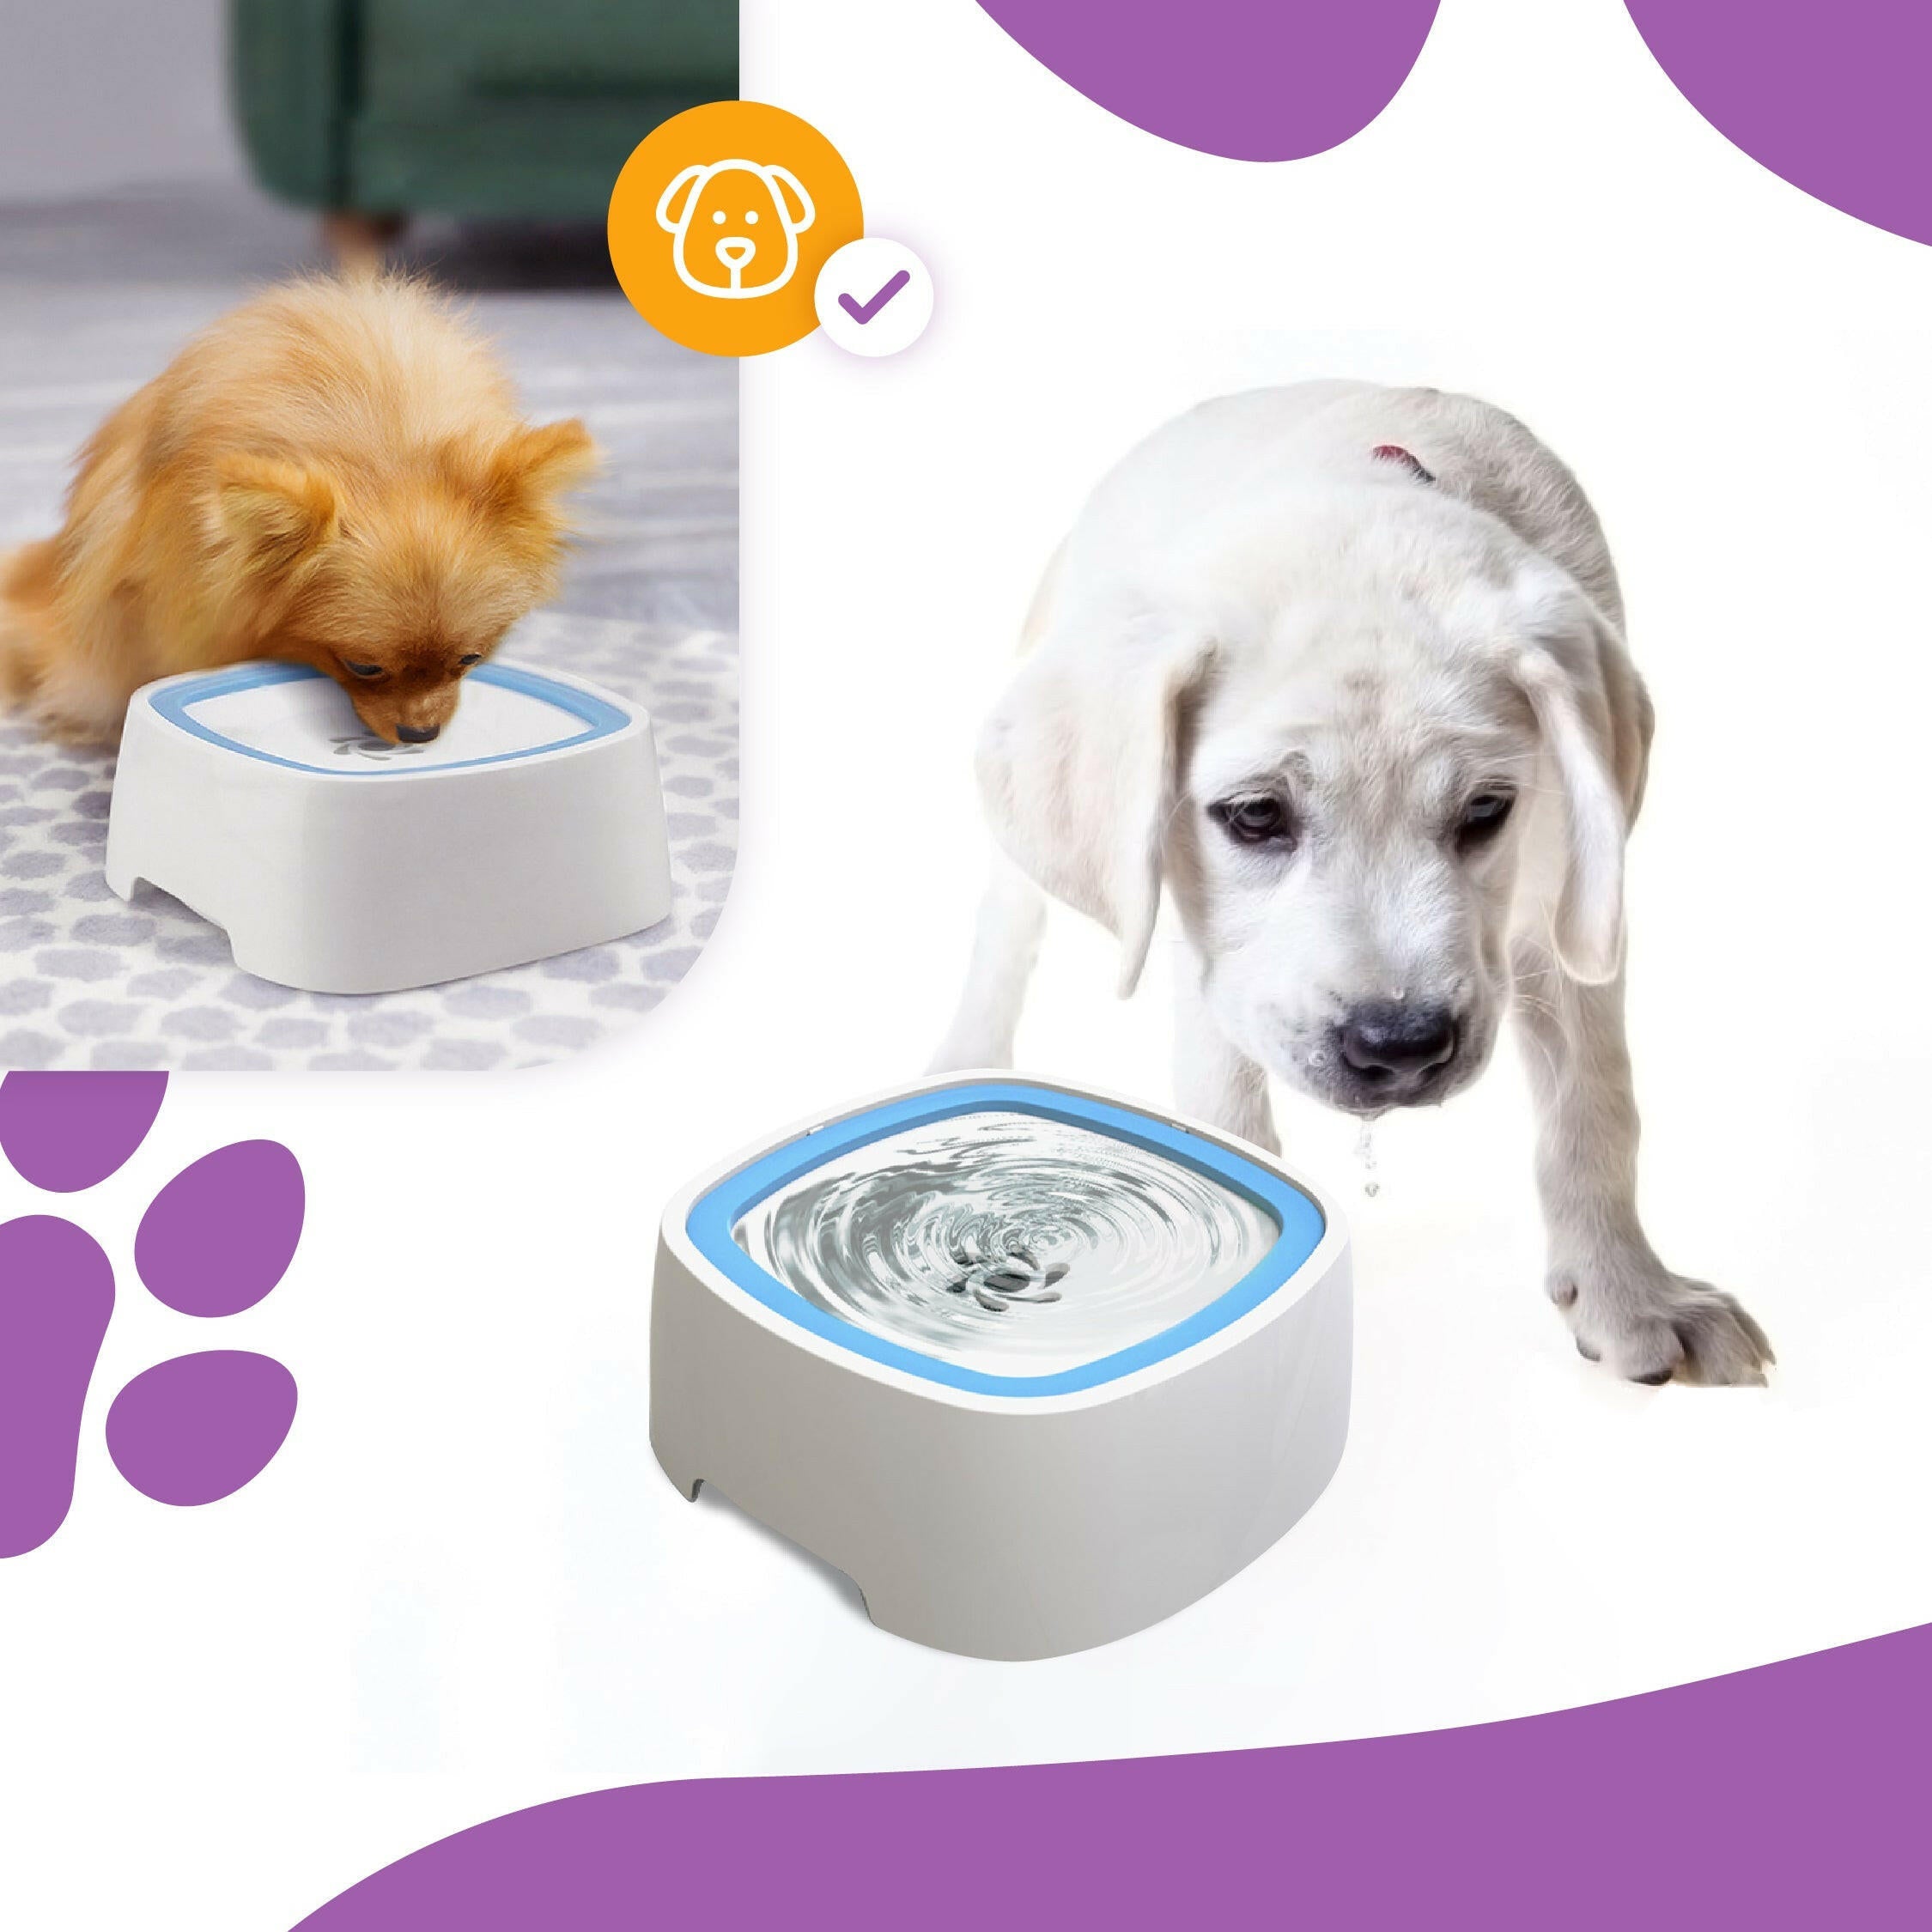 Splash-Free Floating Pet Bowl - Keep Your Floors Dry, Hydrate Your Pets with Ease!